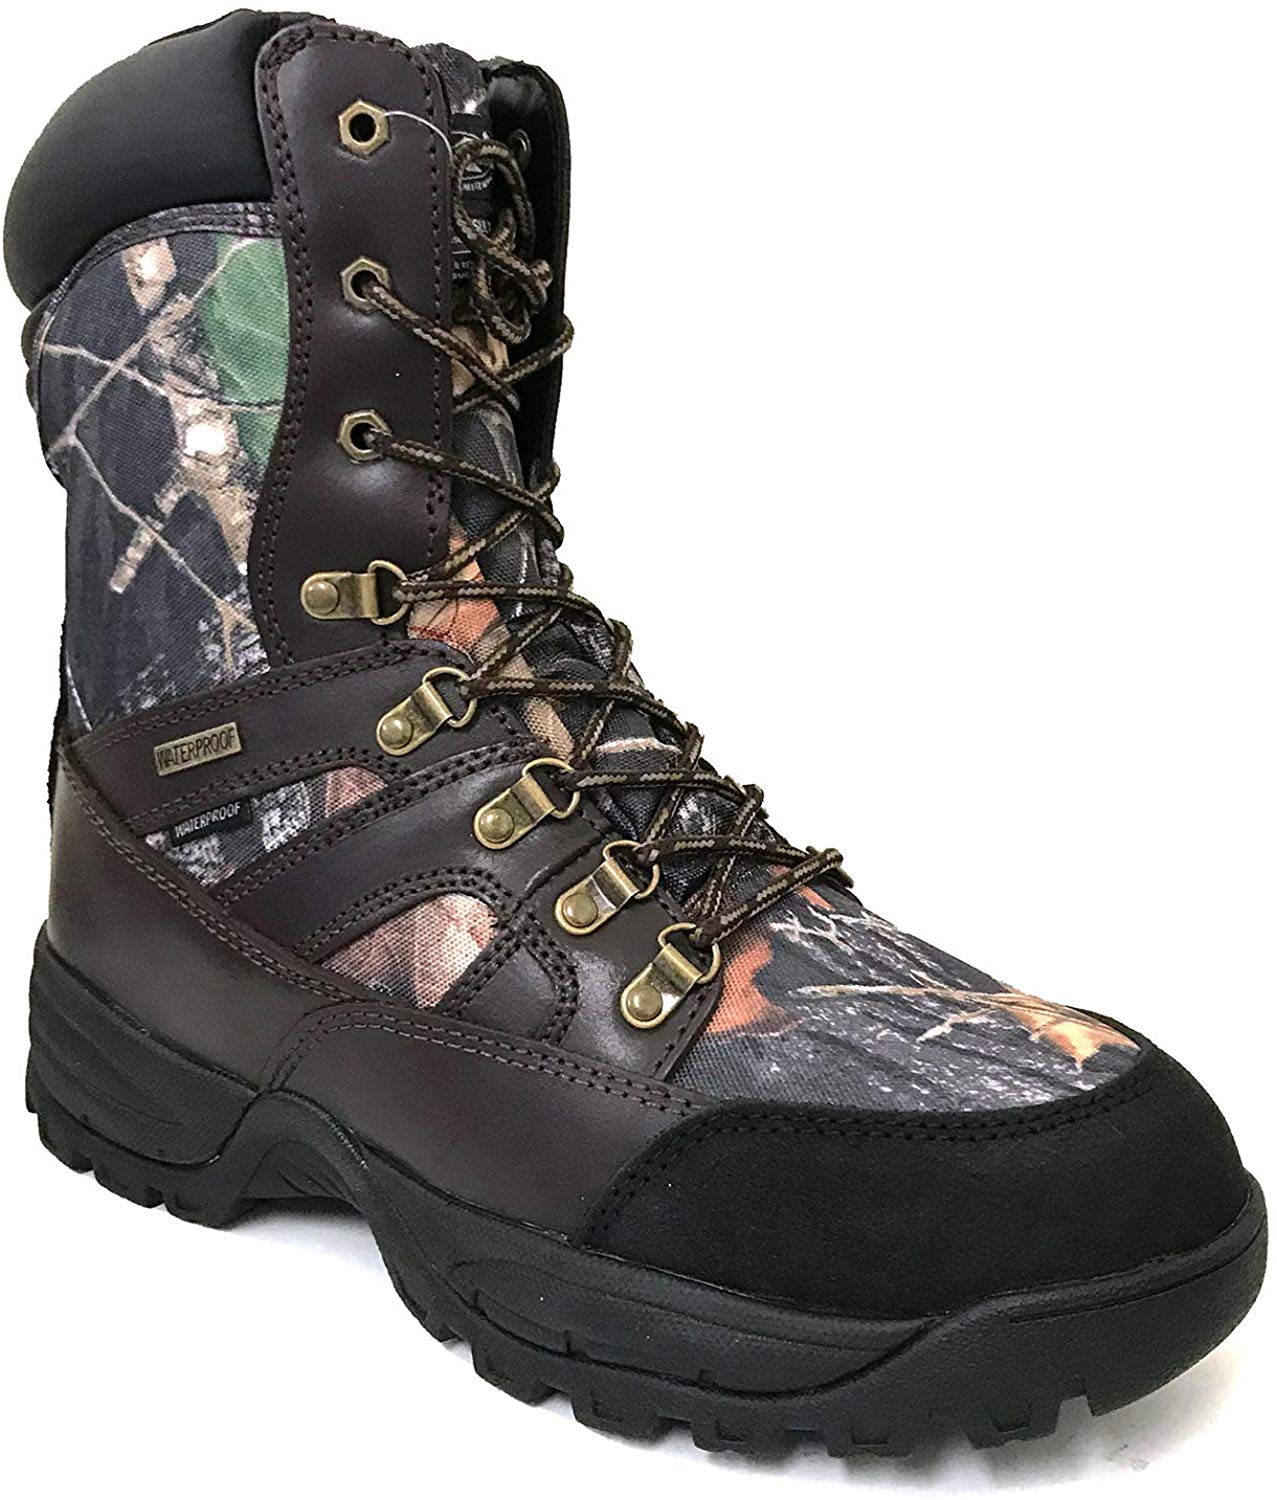 Men's Hunting Boot Waterproof 600 Grams Insulated 9" Interceptor Snow Hiking Shoes - image 1 of 6